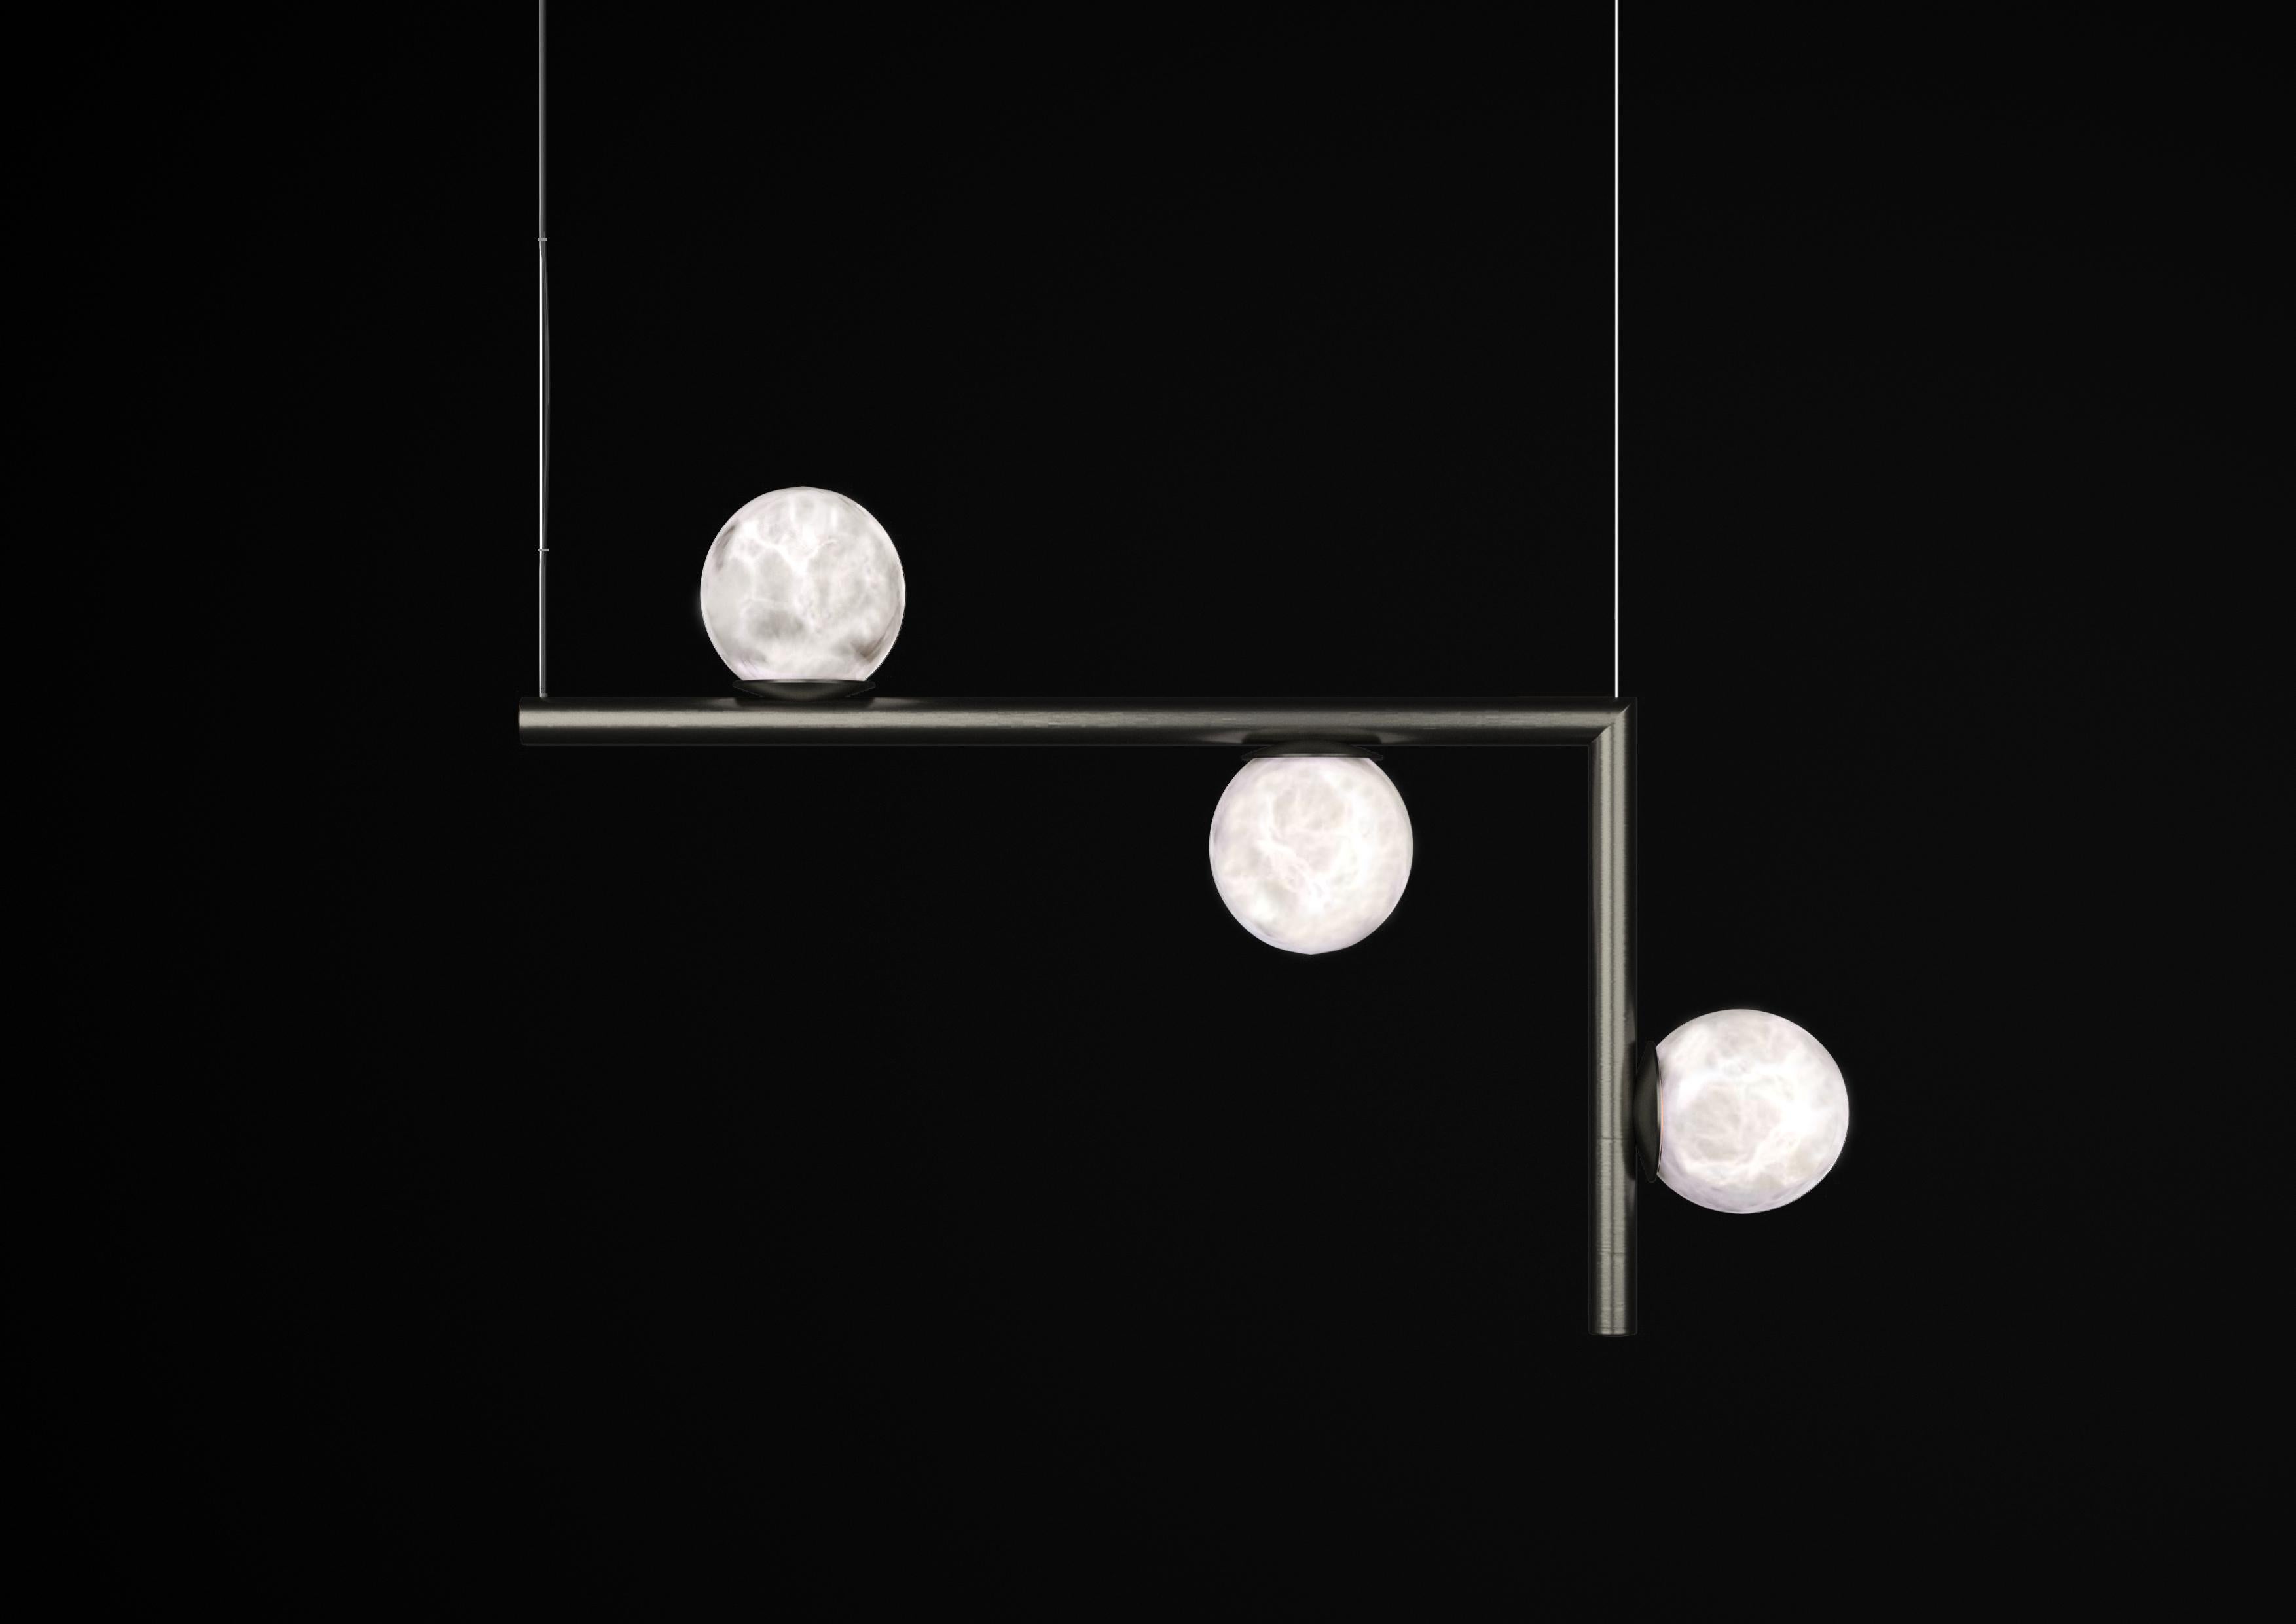 Ofione 2 Brushed Black Metal Pendant Lamp by Alabastro Italiano
Dimensions: D 14 x W 85 x H 55 cm.
Materials: White alabaster and metal.

Available in different finishes: Shiny Silver, Bronze, Brushed Brass, Ruggine of Florence, Brushed Burnished,